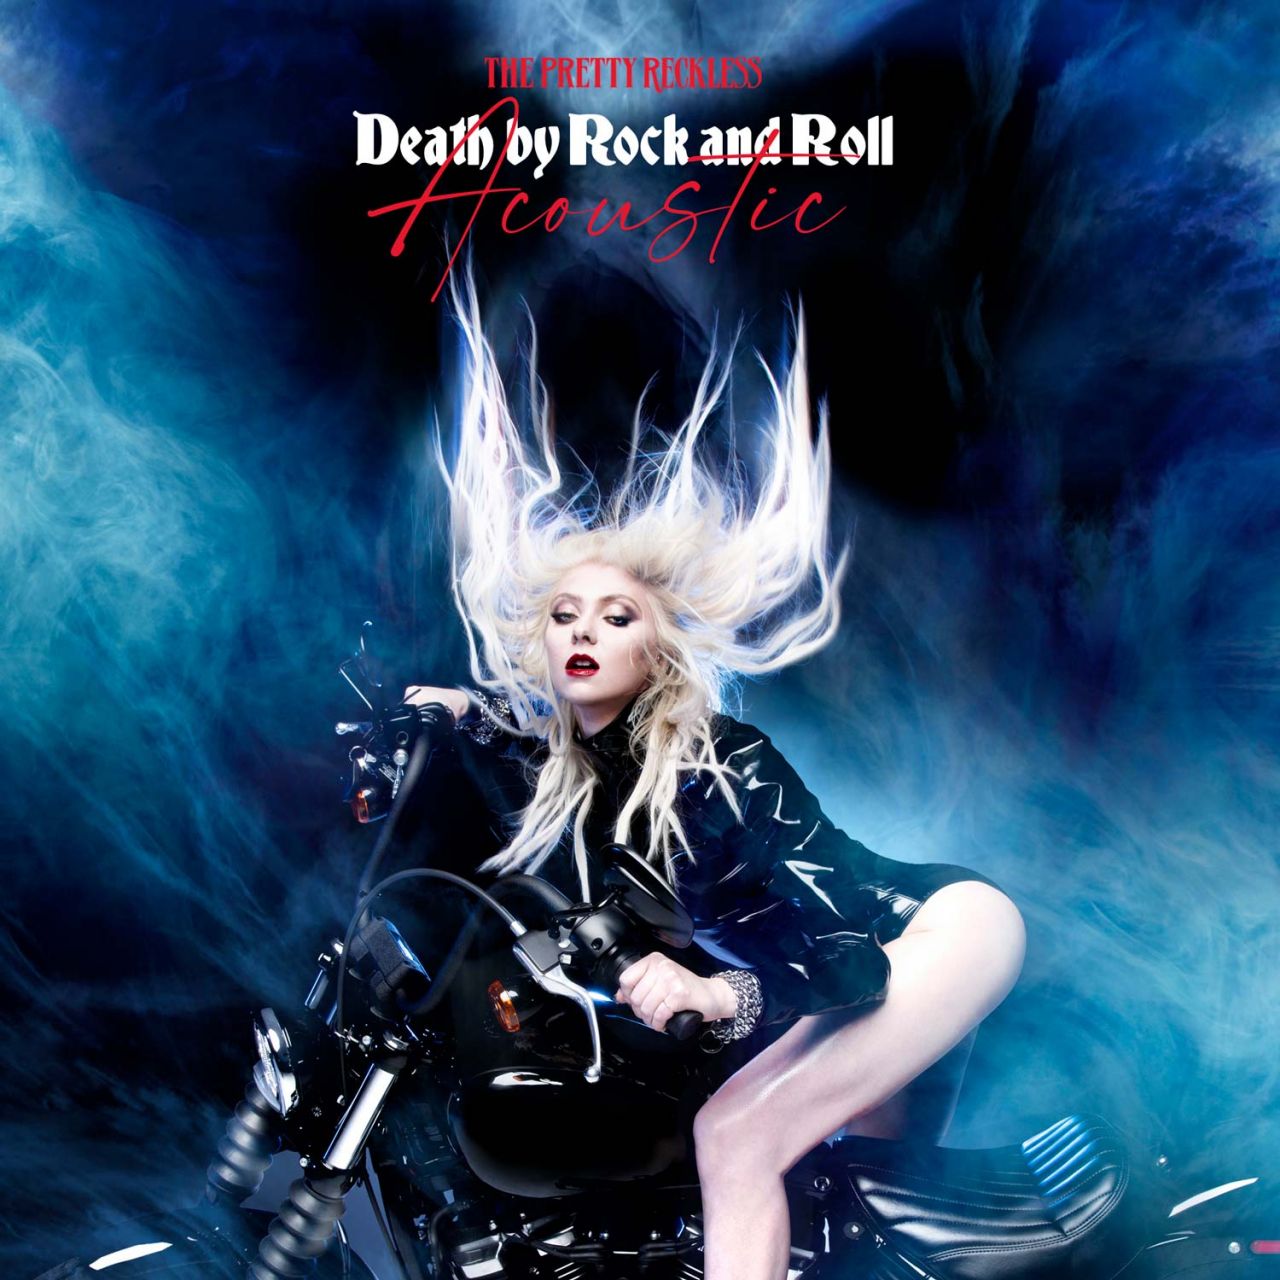 taylor-momsen-death-by-rock-and-roll-single-cover-2020-3.jpg